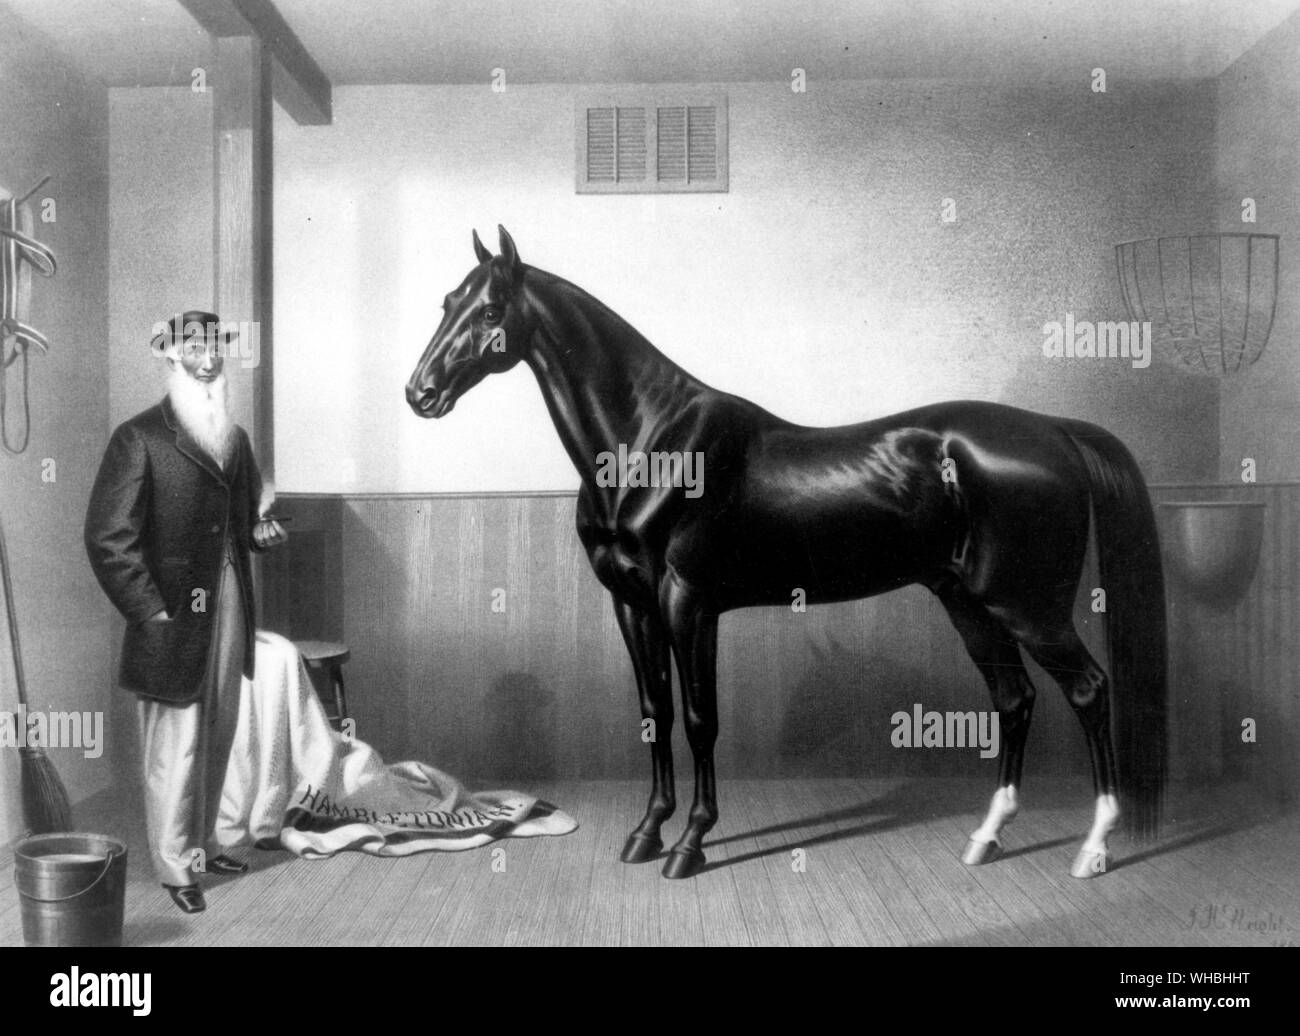 William Rysdyk's Hambletonian 1865, Father of the Trotting Horse. His employer, Seeley, acquired a Charles Kent Mare, which had been permanently injured and was used only for breeding. Sired by Bellfounder, she was of Norfolk Trotter ancestry, a breed noted for its smooth gait. Seeley bred his mare to Abdullah, who was a grandson of Messenger, but a mean and ugly horse. The offspring of the Charles Kent Mare and Abdullah was a bay colt who was to be a keystone in the future of harness racing.. Rysdyk persuaded his employer to sell him the colt and named him Hambletonian. In all, Hambletonian Stock Photo